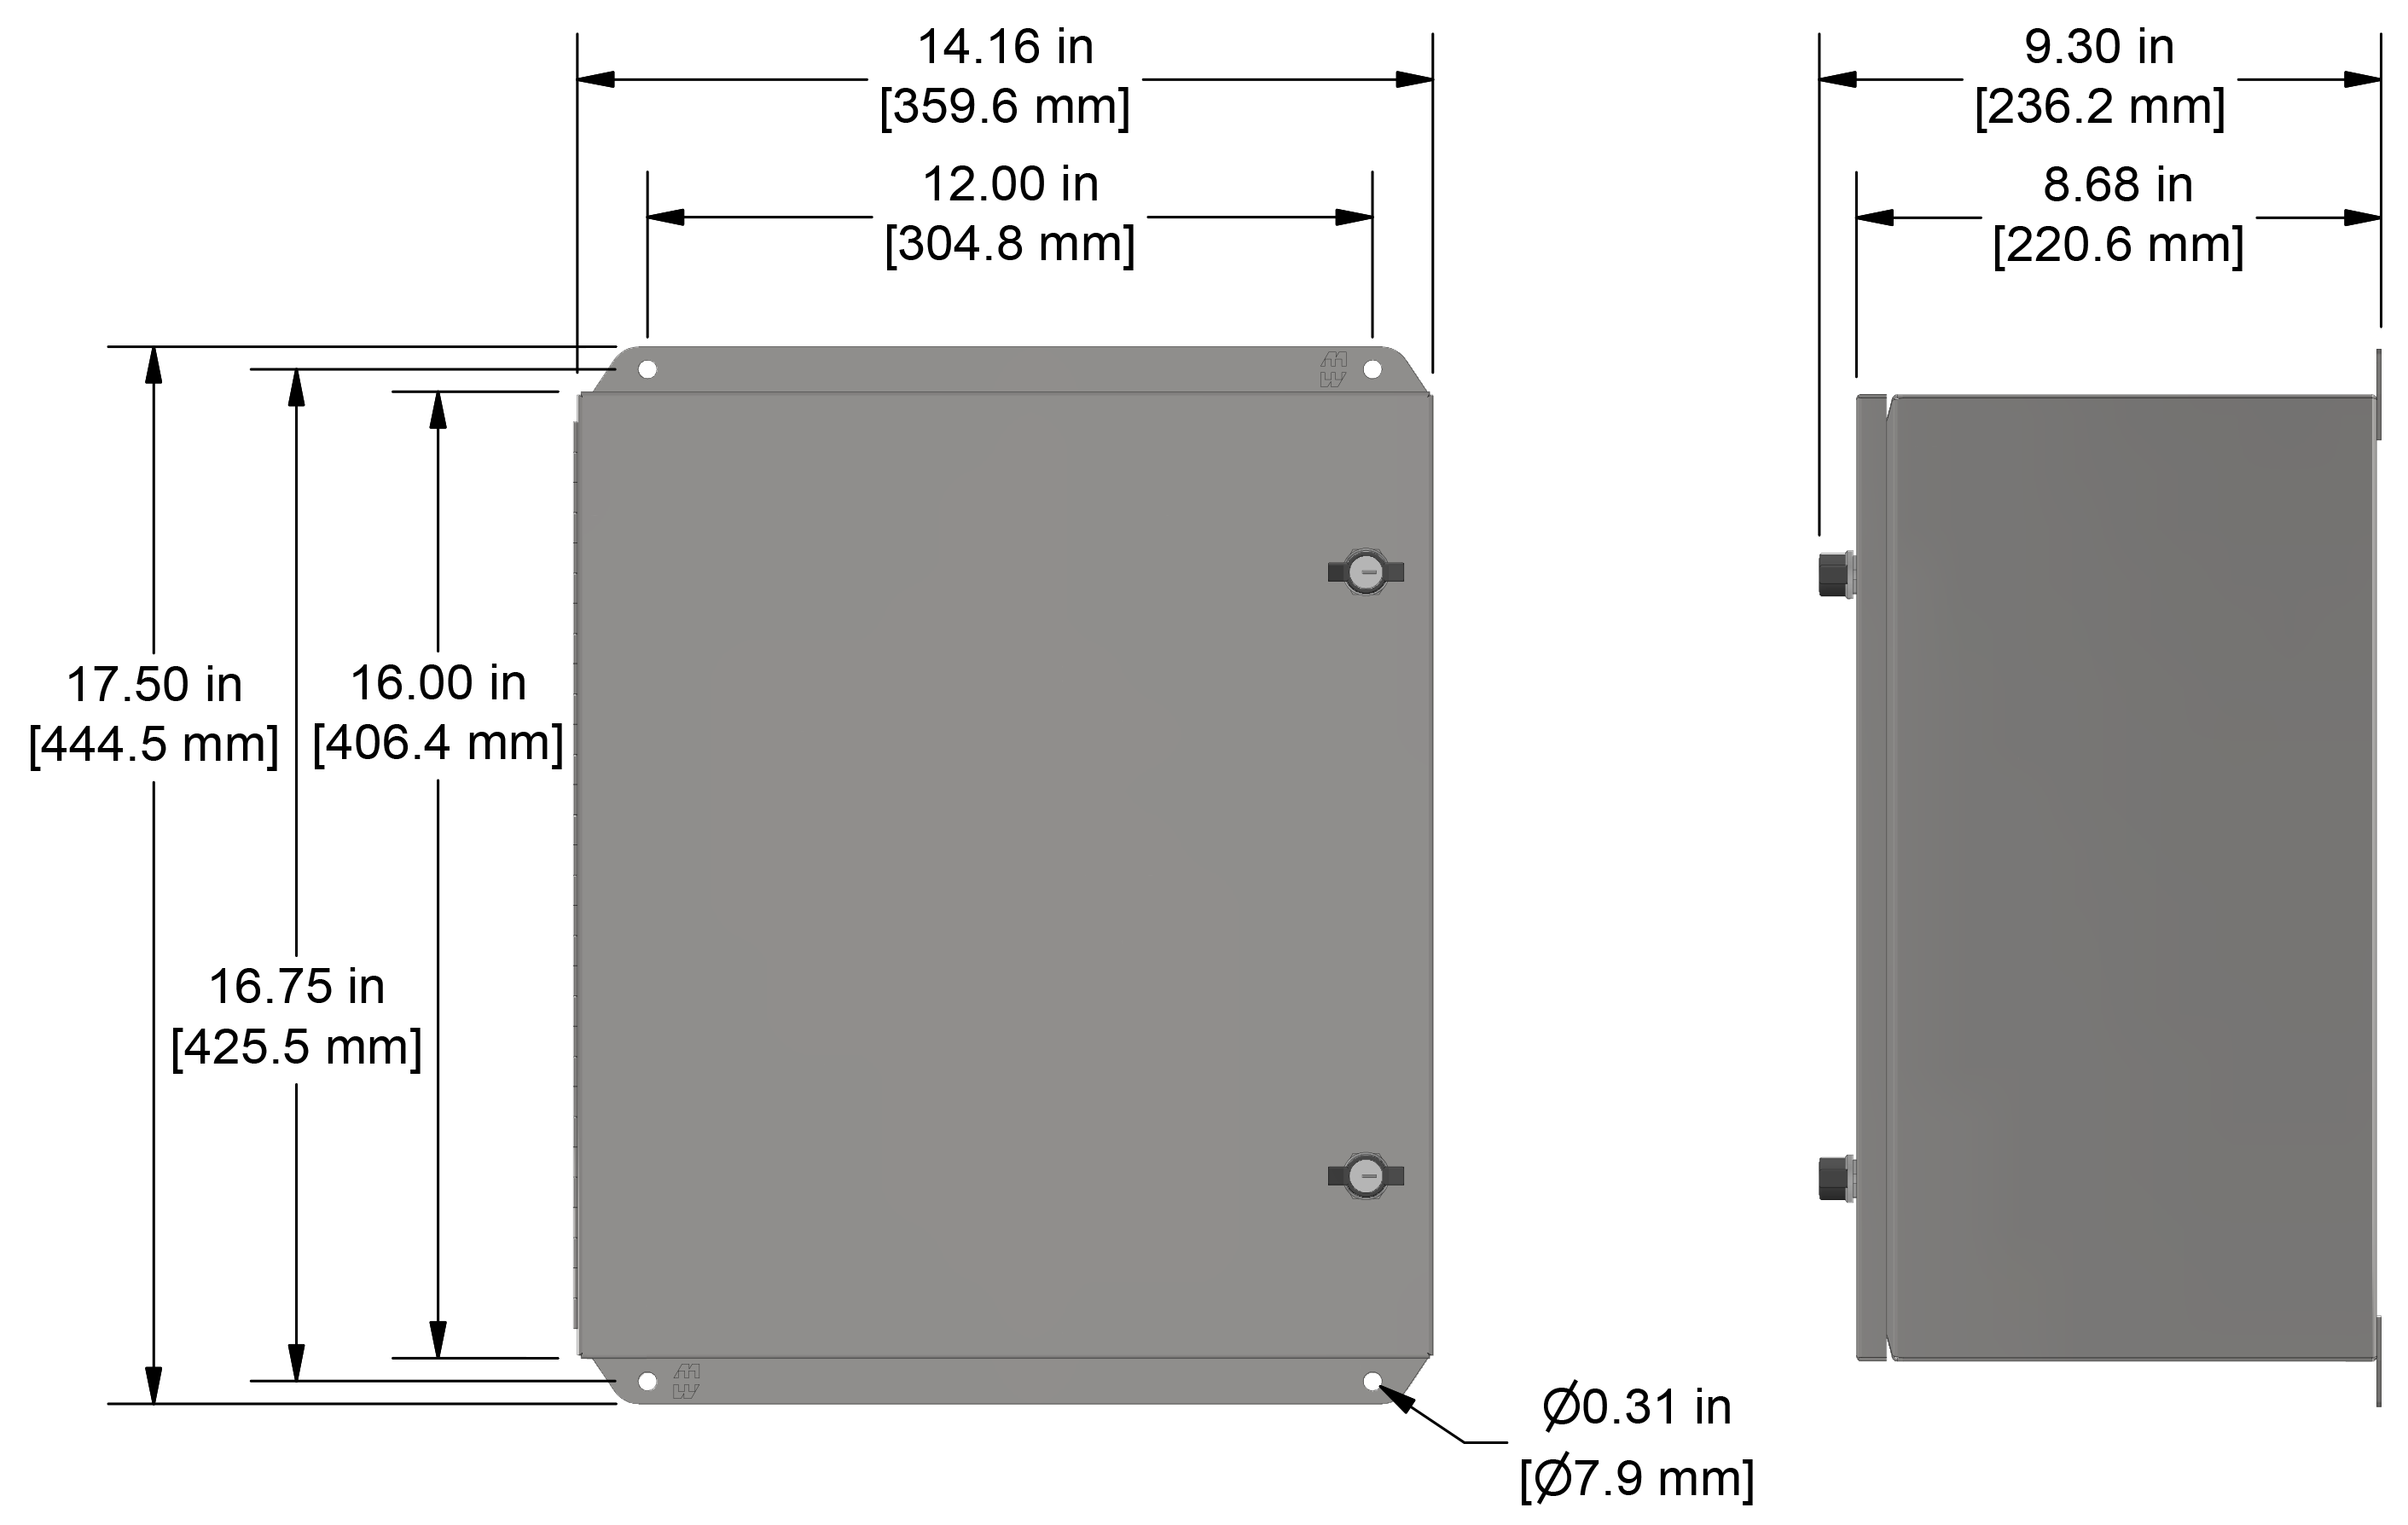 A drawing showing the dimensions of a CTC JB230 Extended Capacity industrial enclosure.